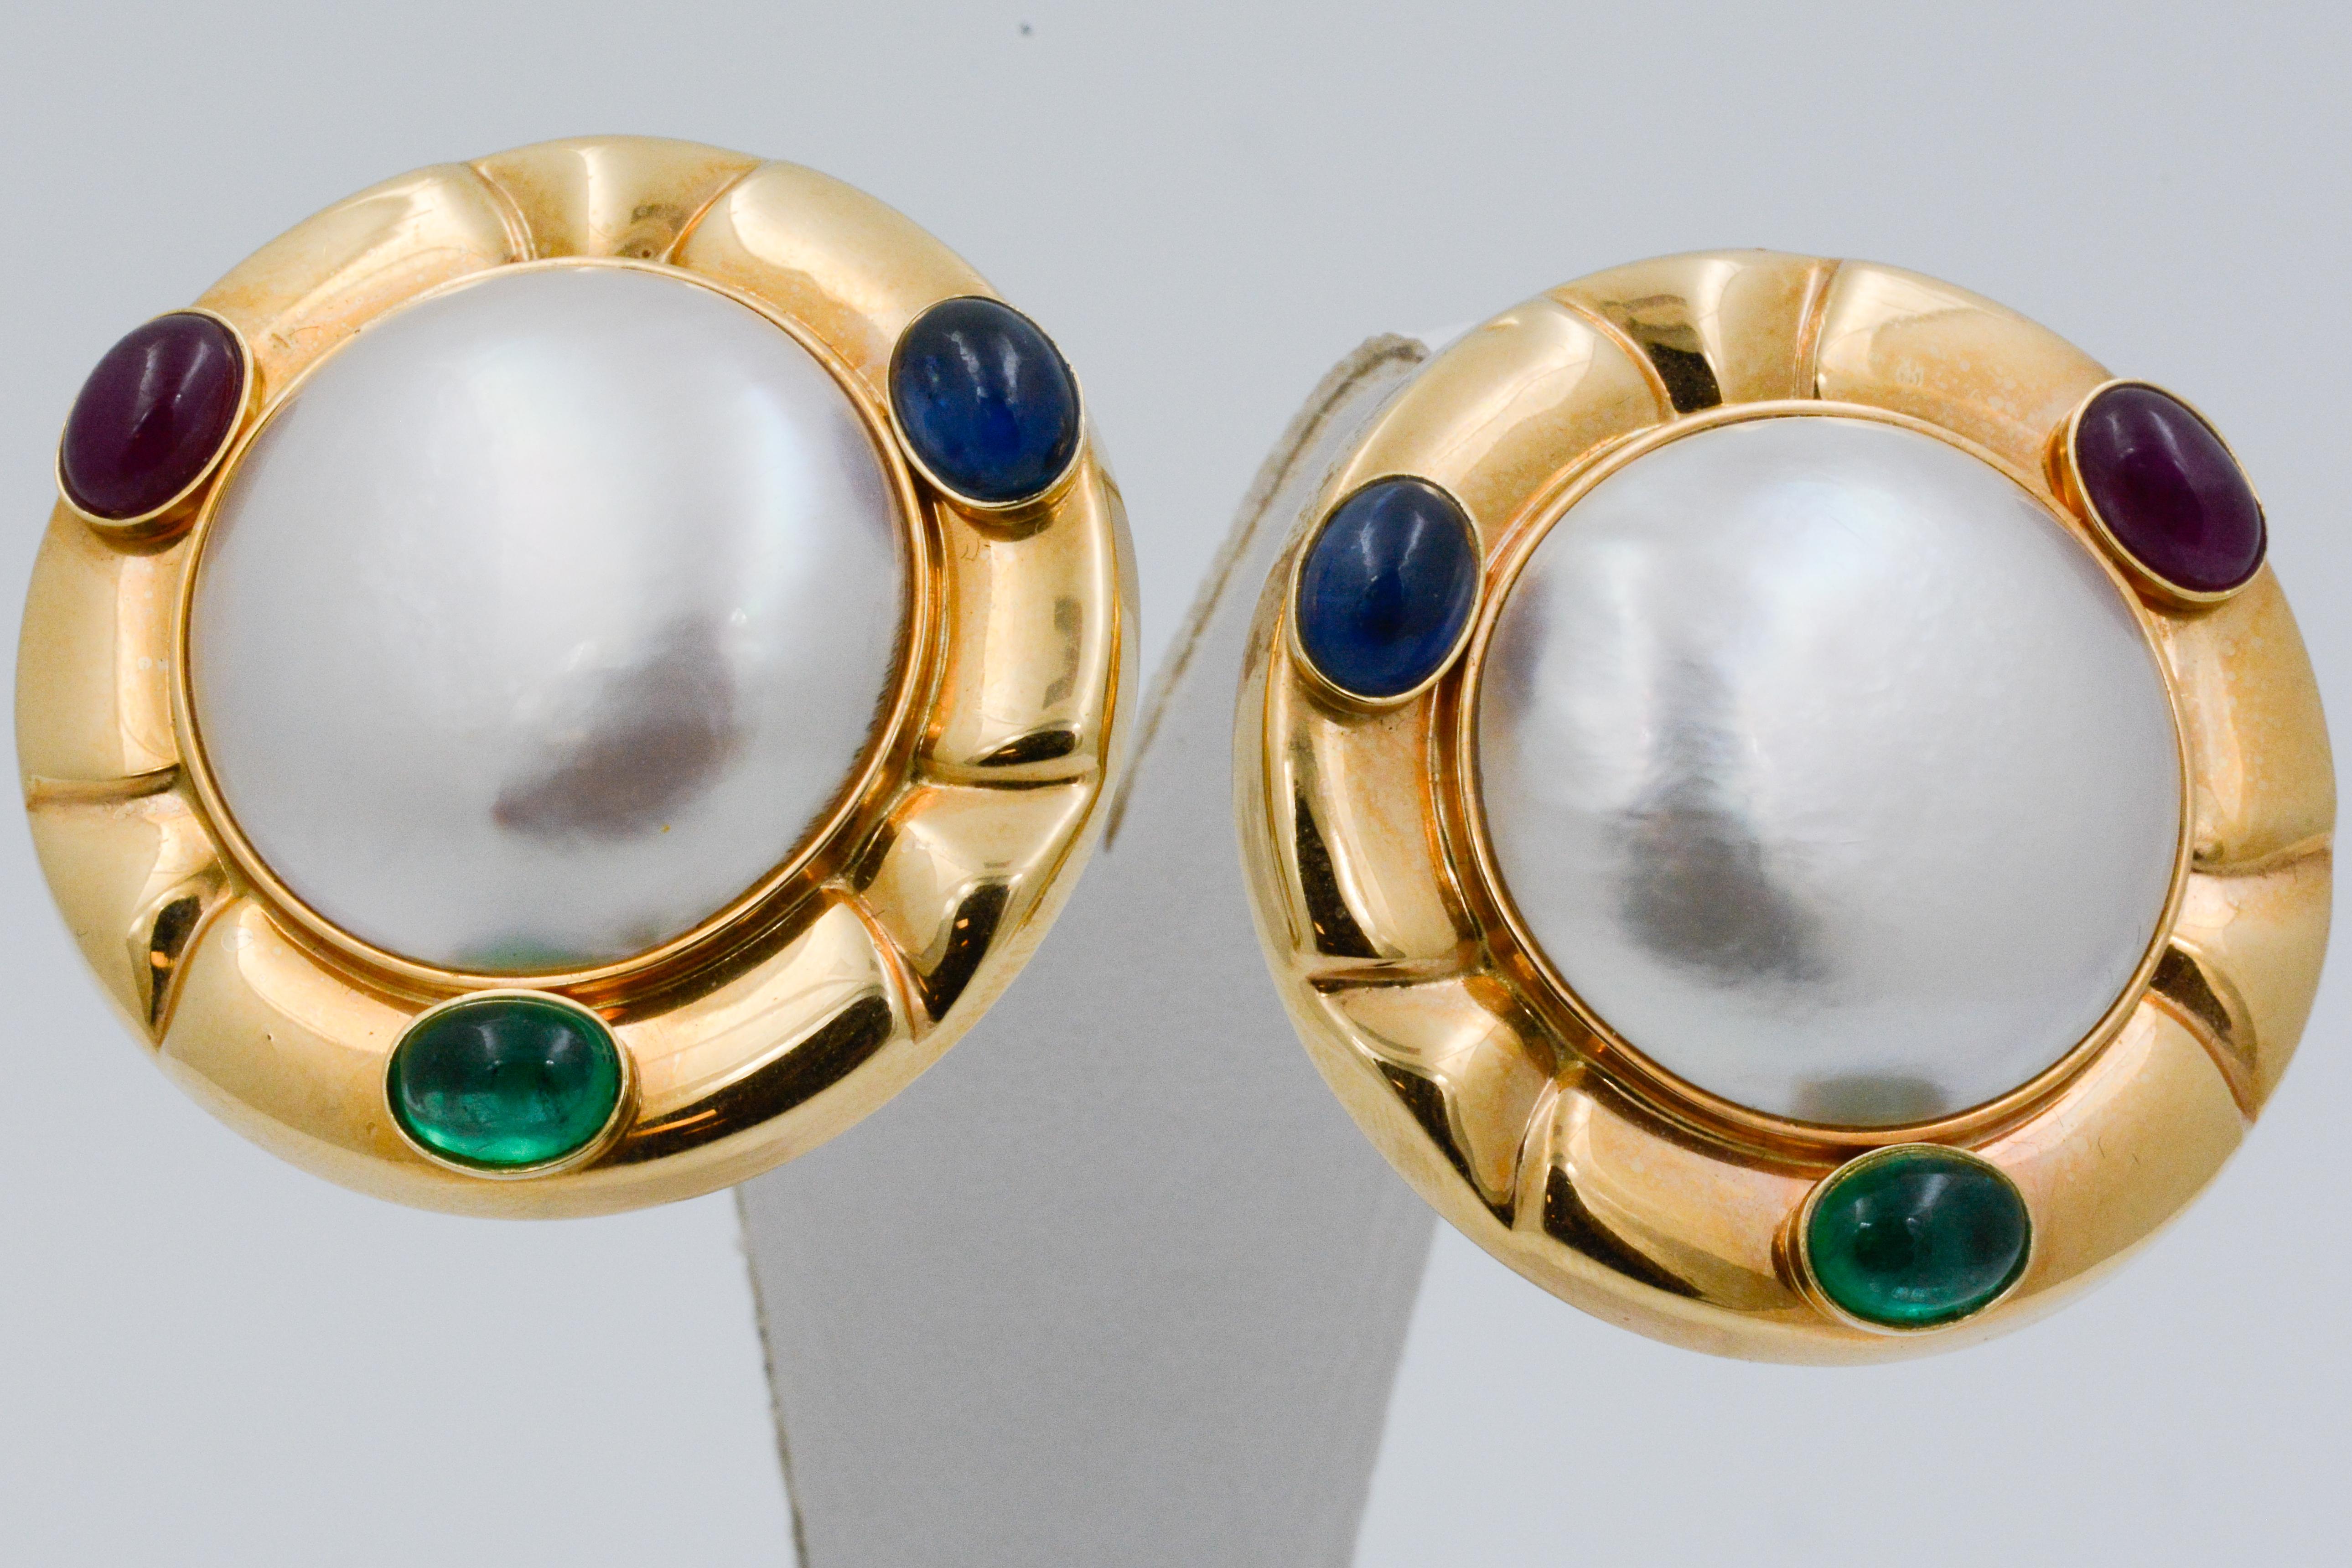  Shiny 14 karat yellow surrounds a large Mabe' pearl is set with one cabochon cut blue sapphire, one cabochon cut ruby and one cabochon cut emerald. 